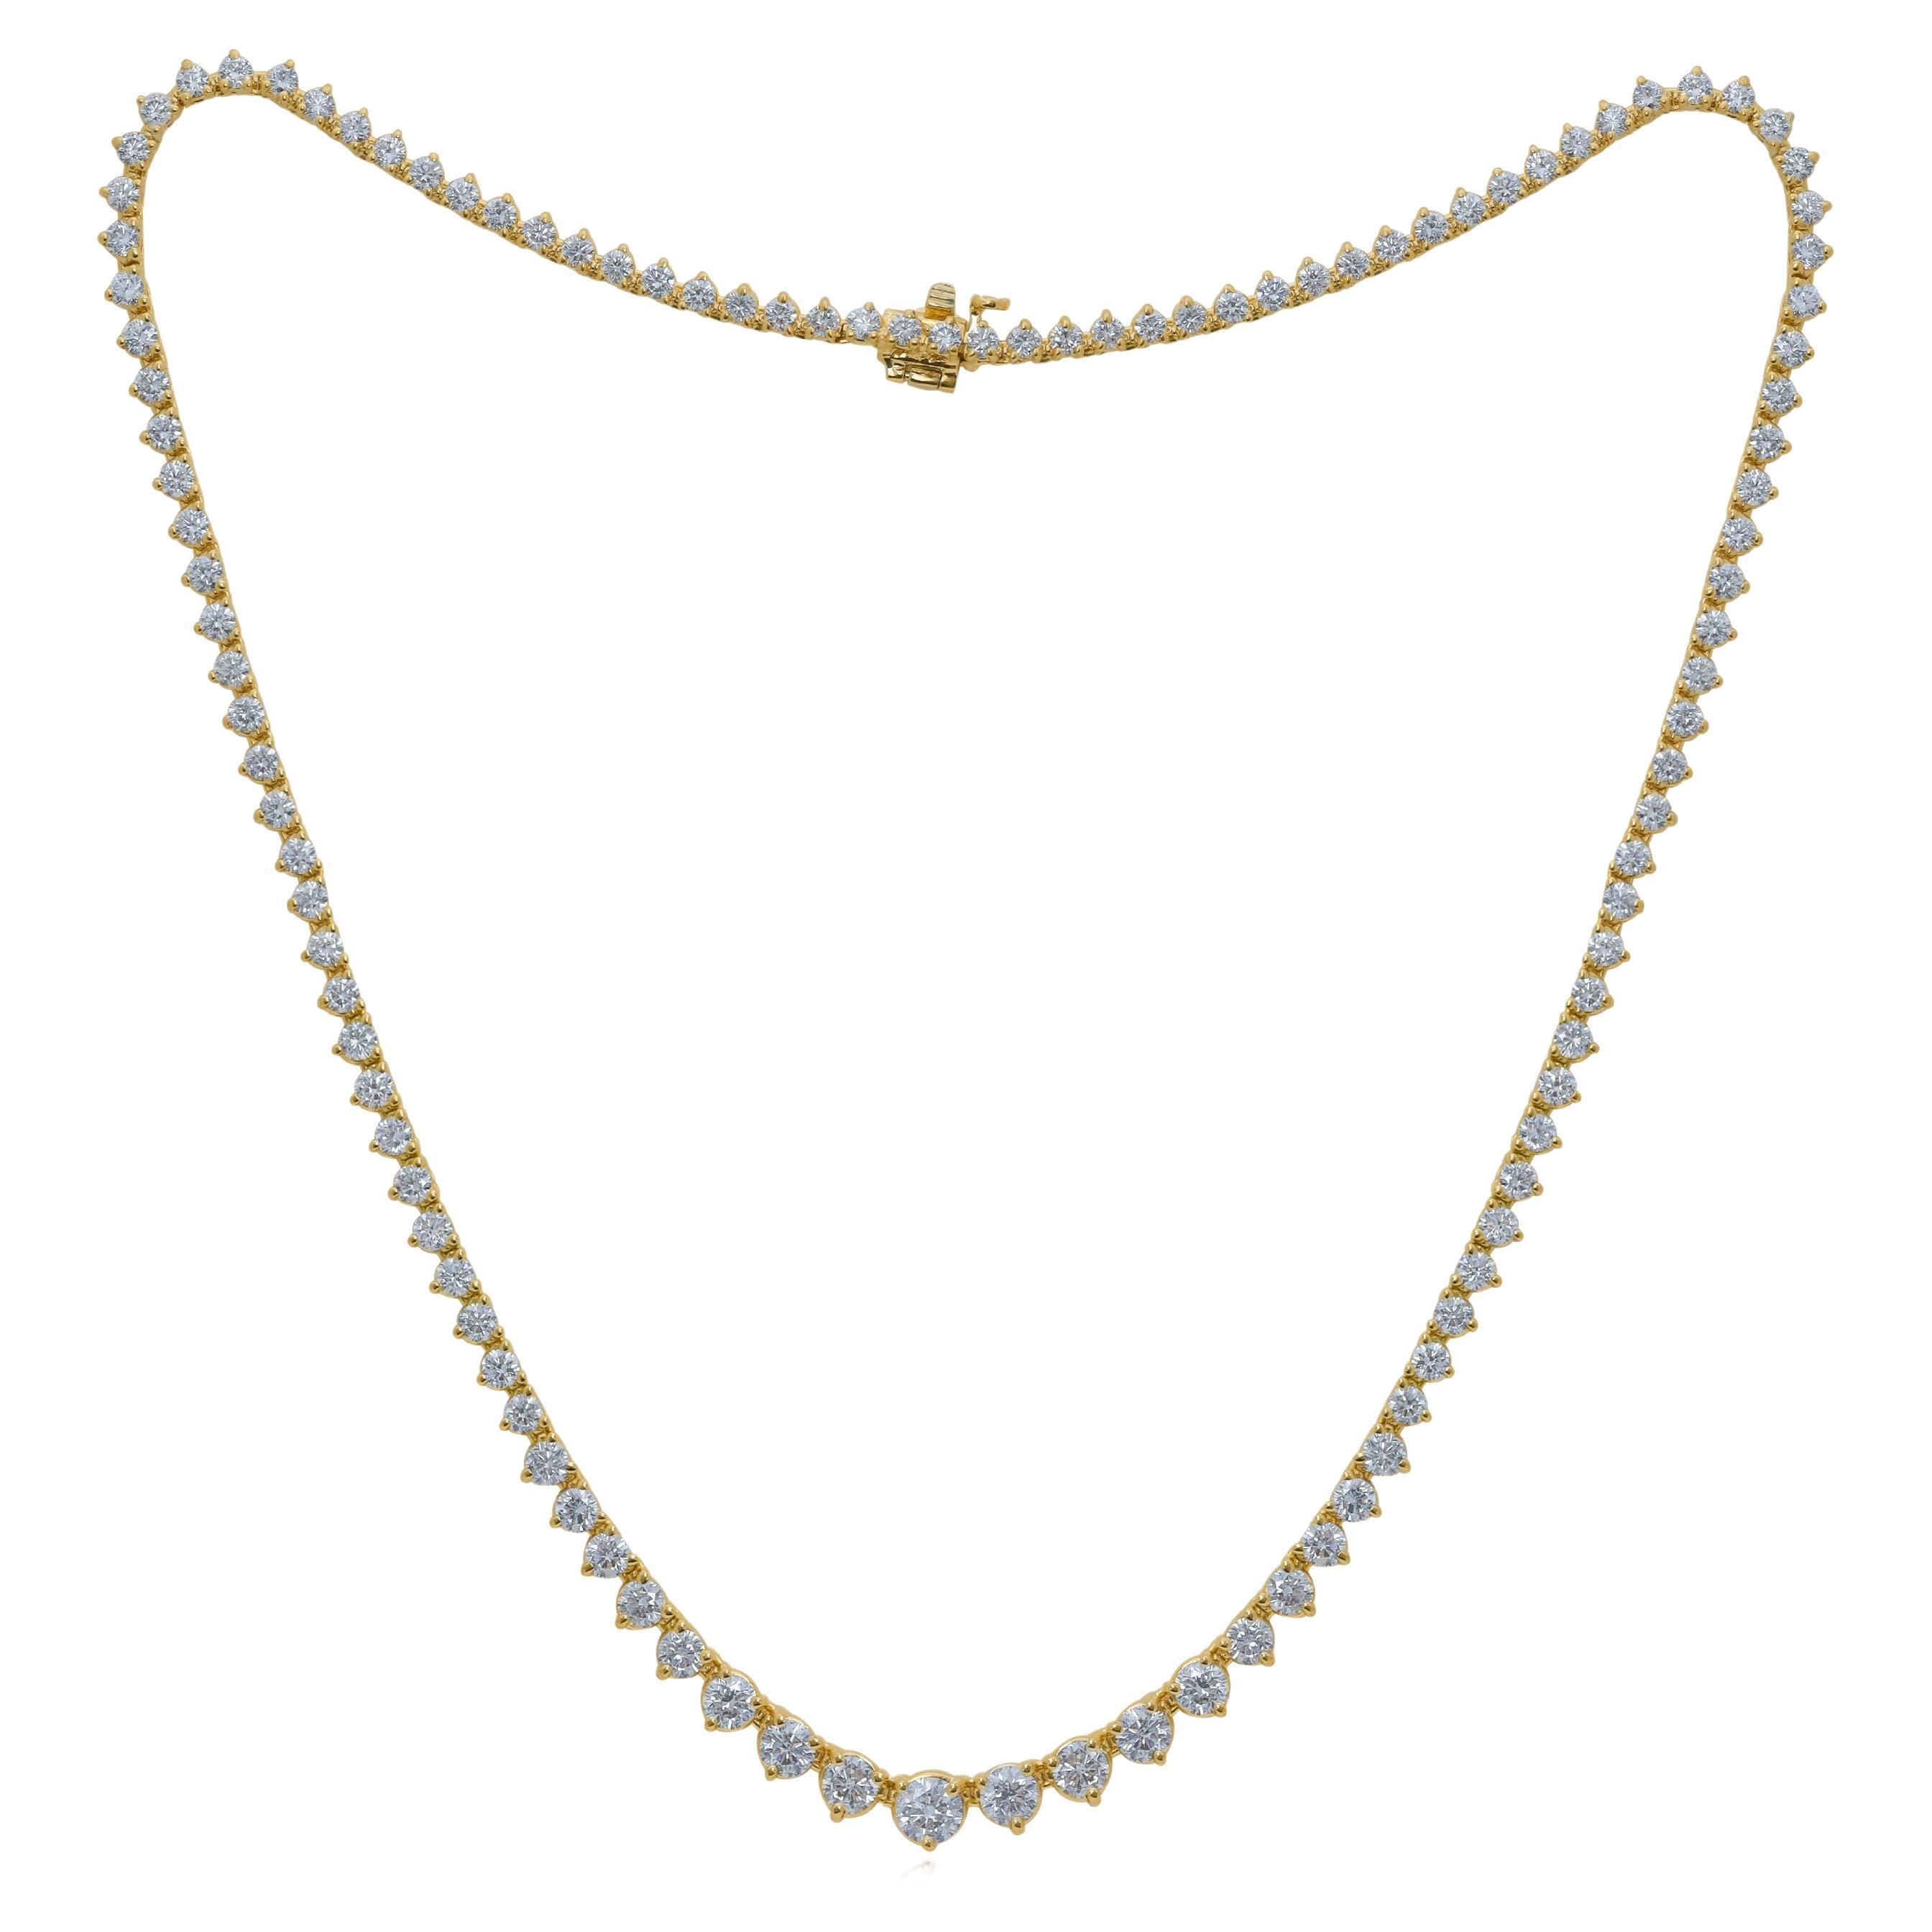 Diana M. 18kt Yellow Gold Graduated Reviera Tennis Necklace Featuring 11.15 cts 